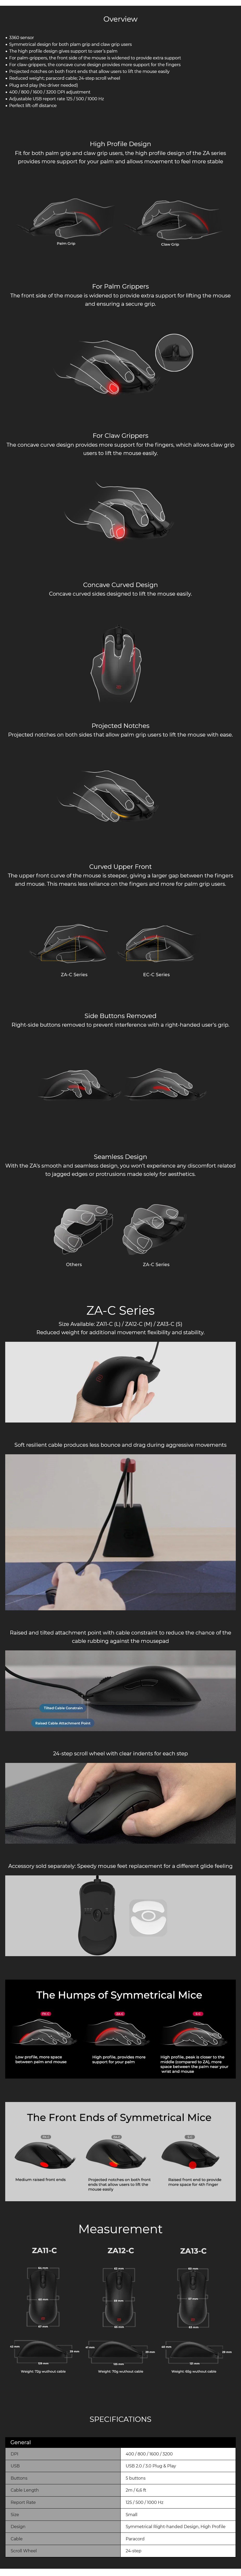 A large marketing image providing additional information about the product BenQ ZOWIE ZA13-C Esports Gaming Mouse - Additional alt info not provided